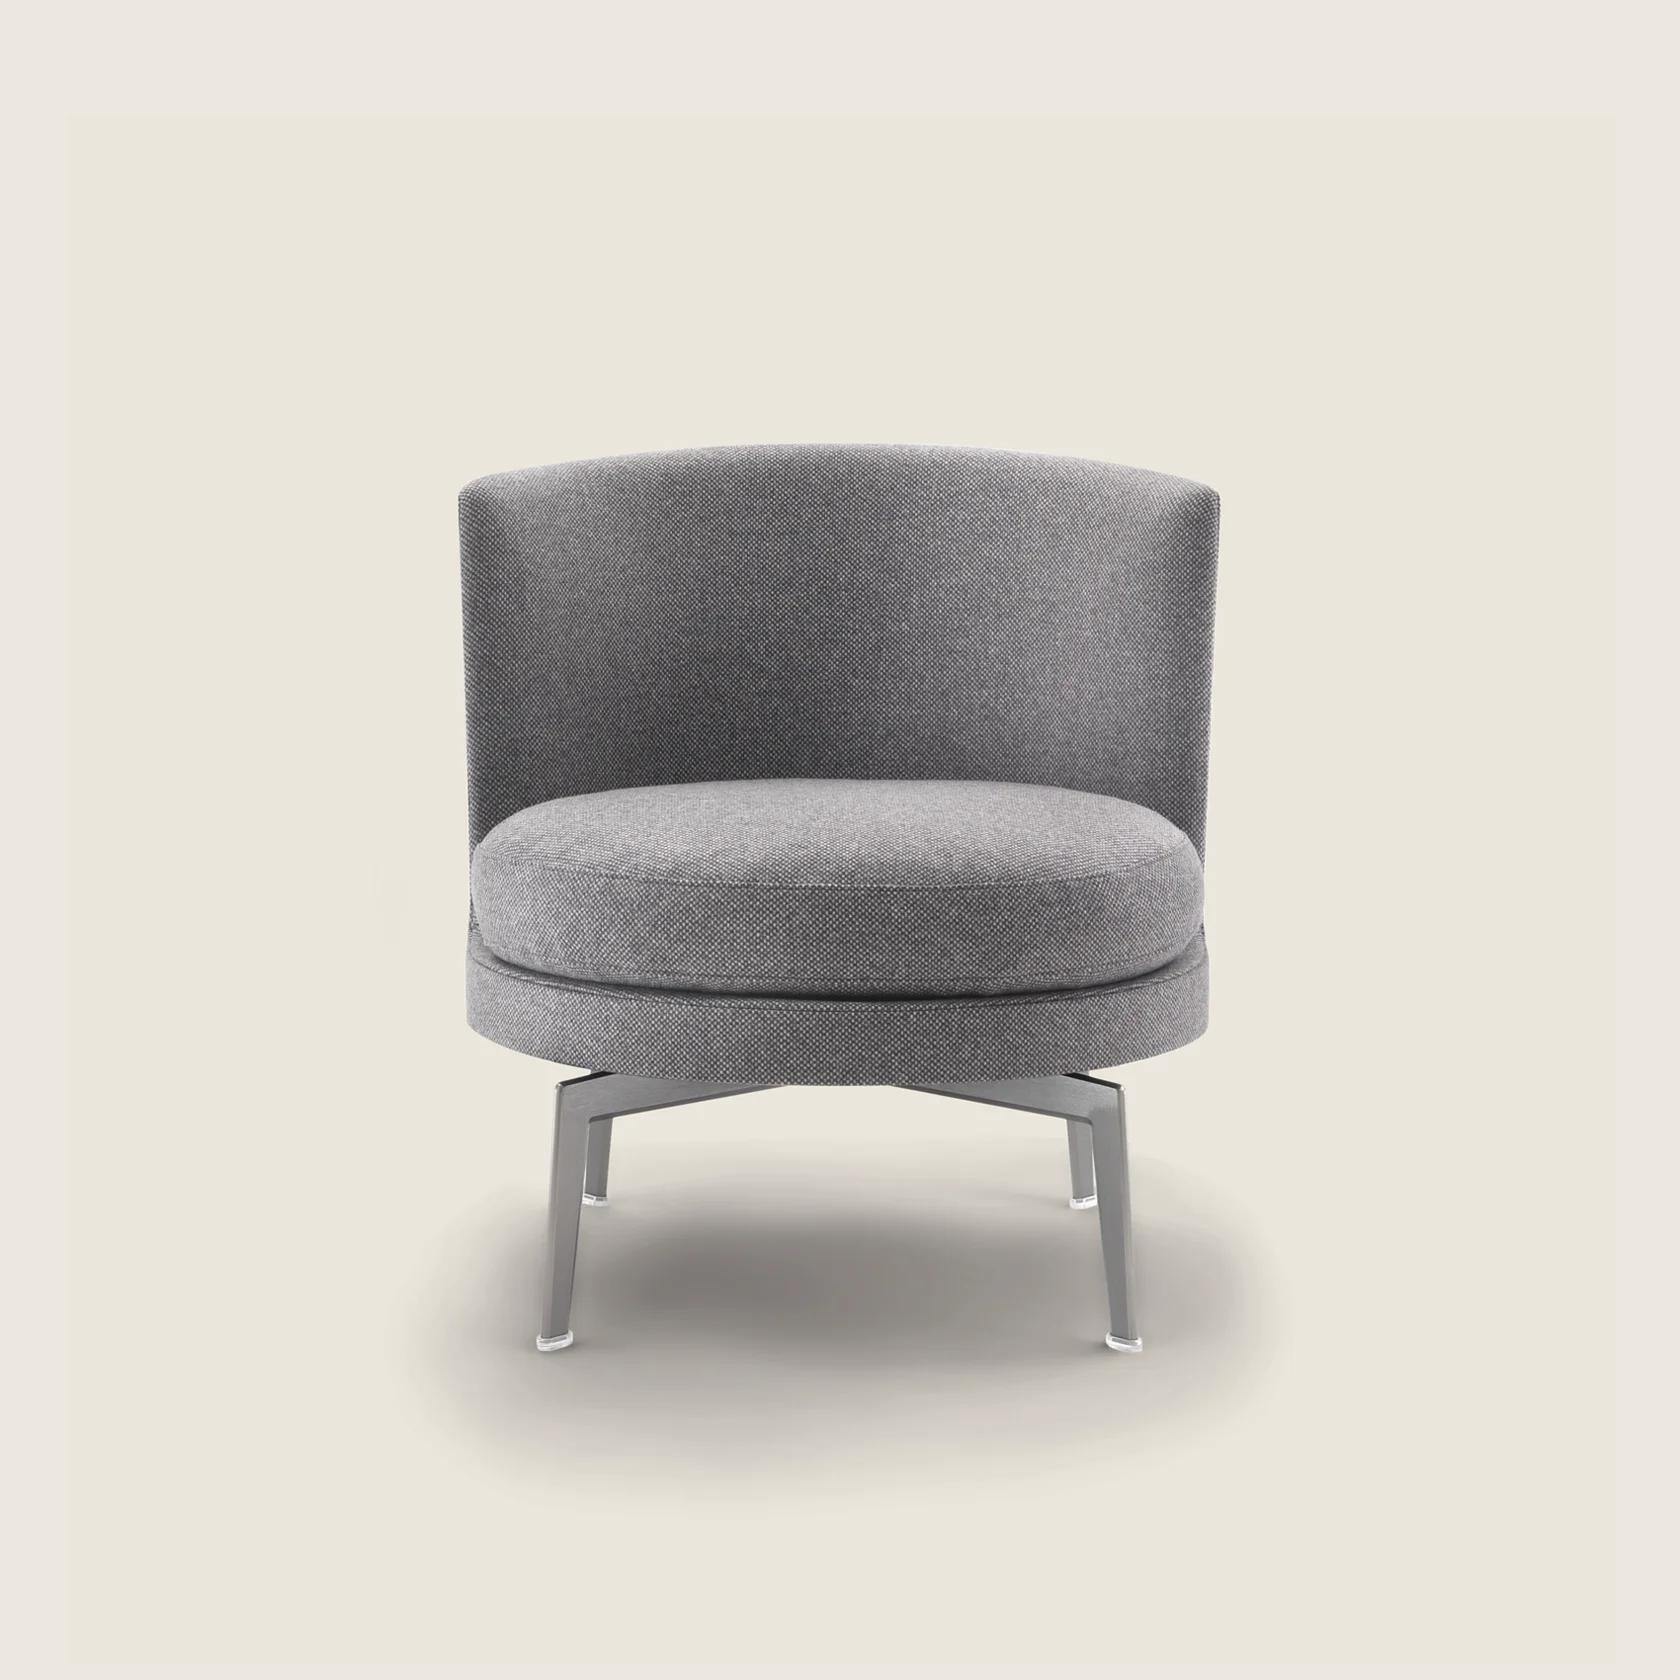 FEEL GOOD Armchairs  Design Made in Italy - Flexform